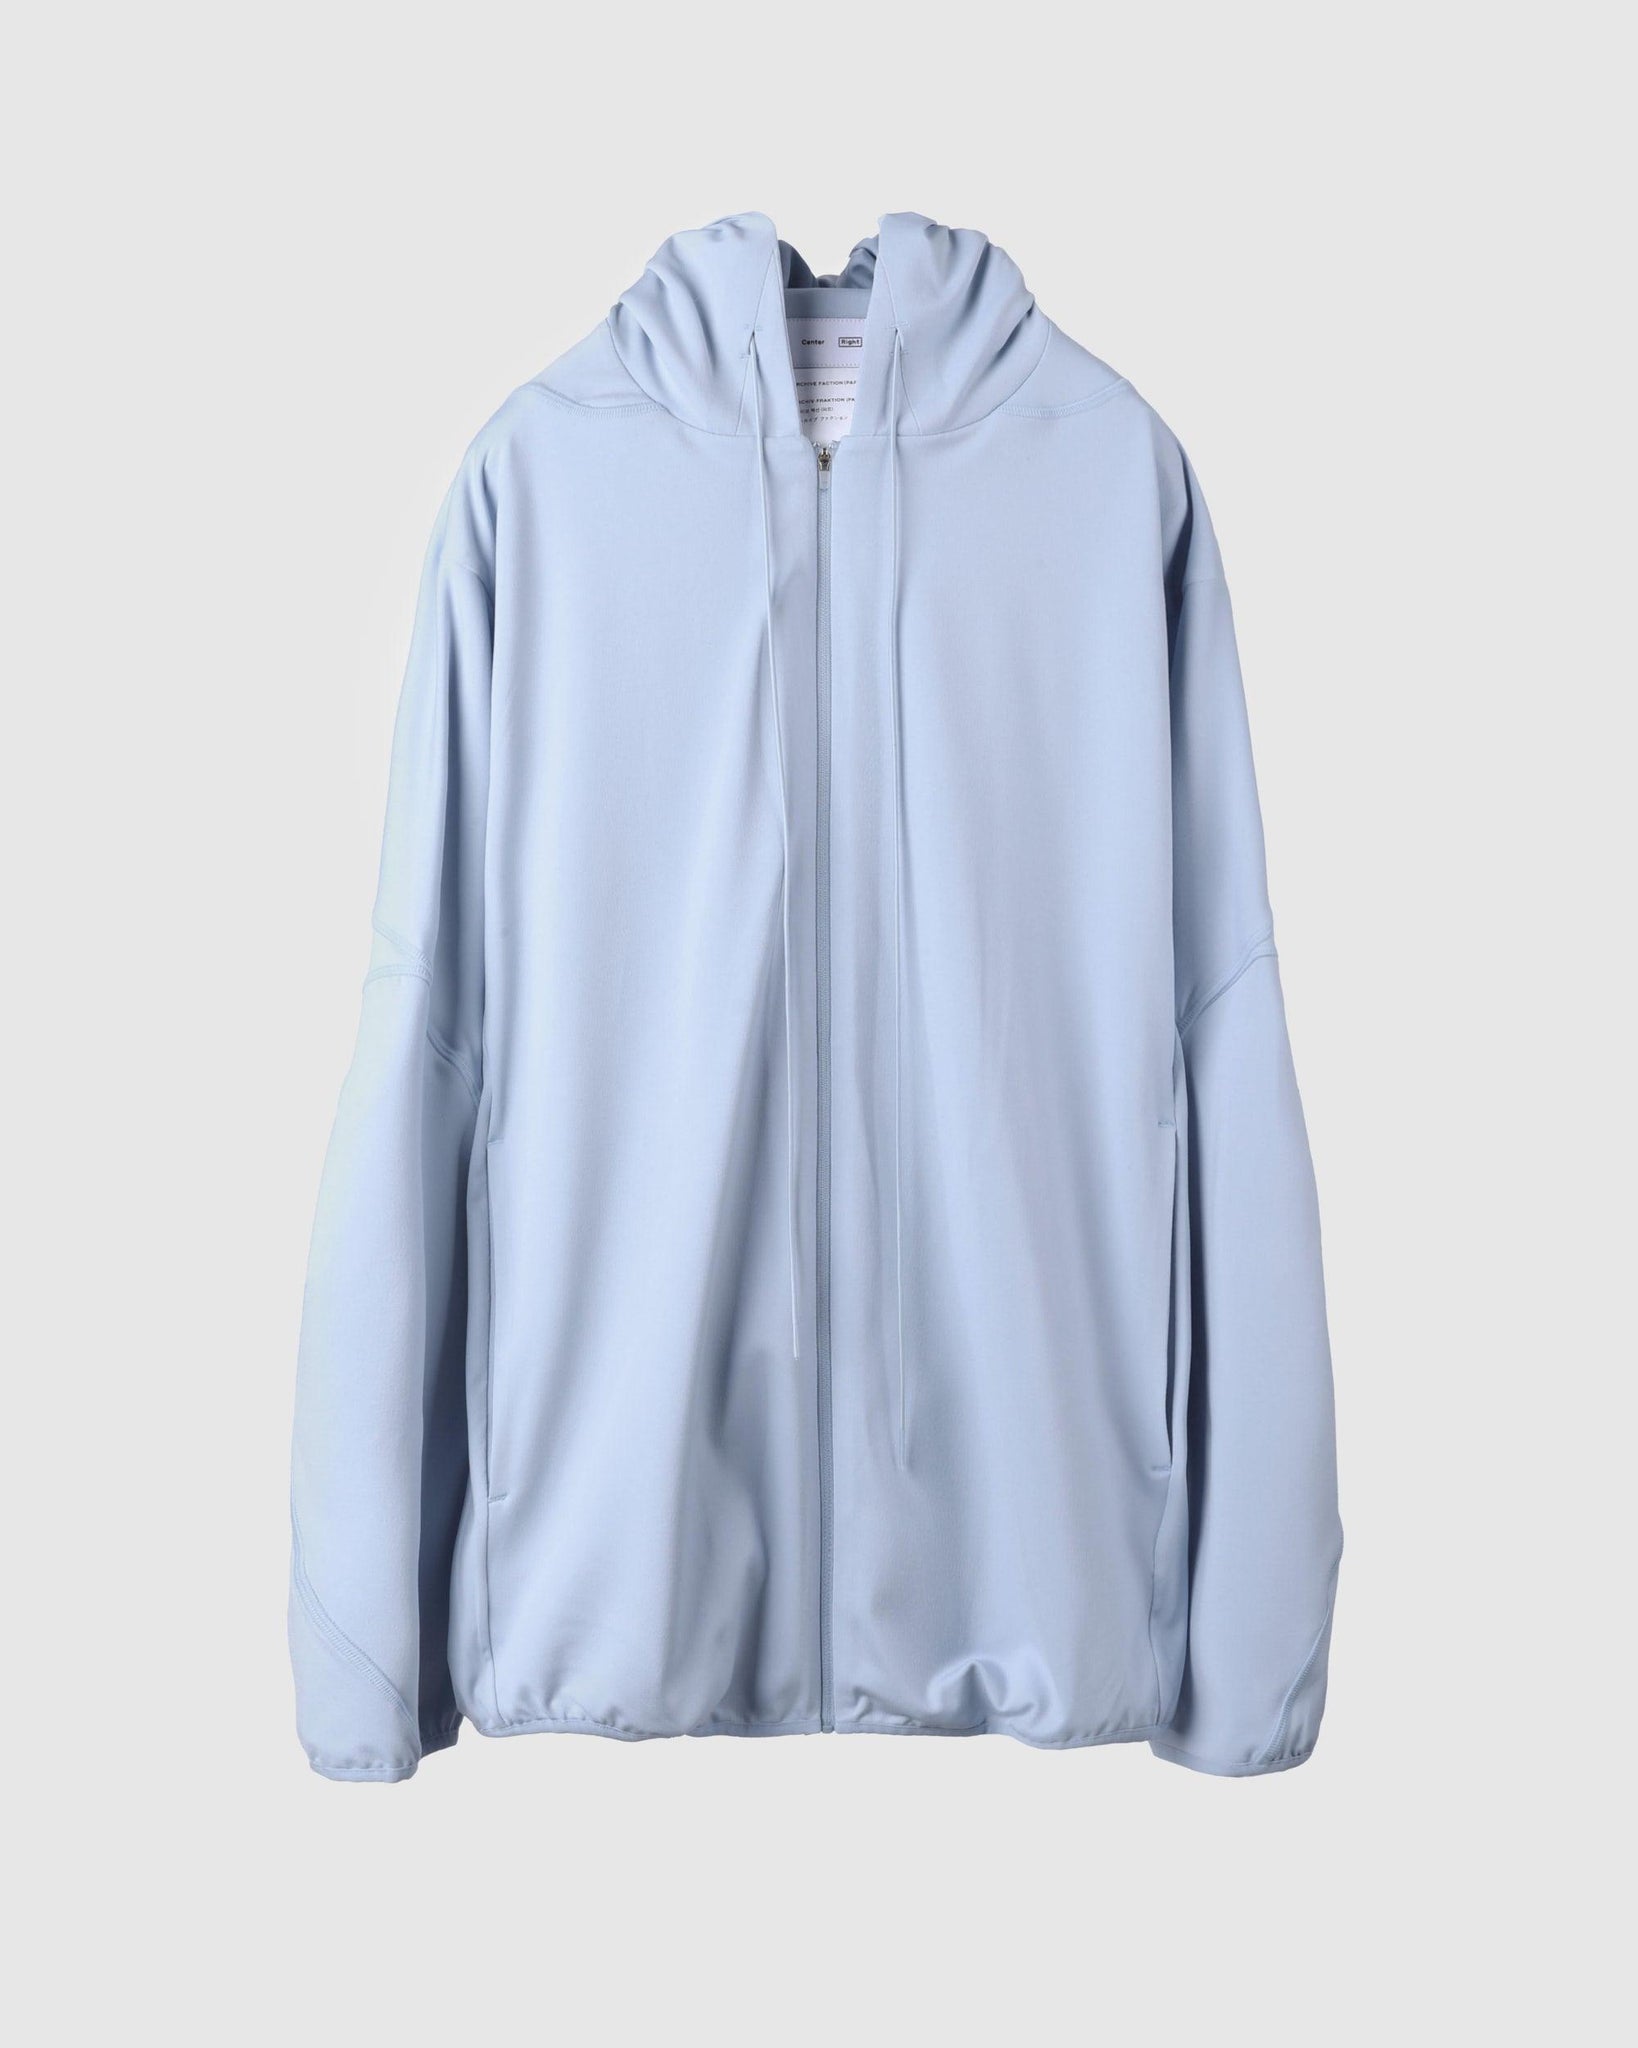 POST ARCHIVE FACTION (PAF) 5.0 Hoodie Right Sky Blue – Chinatown 